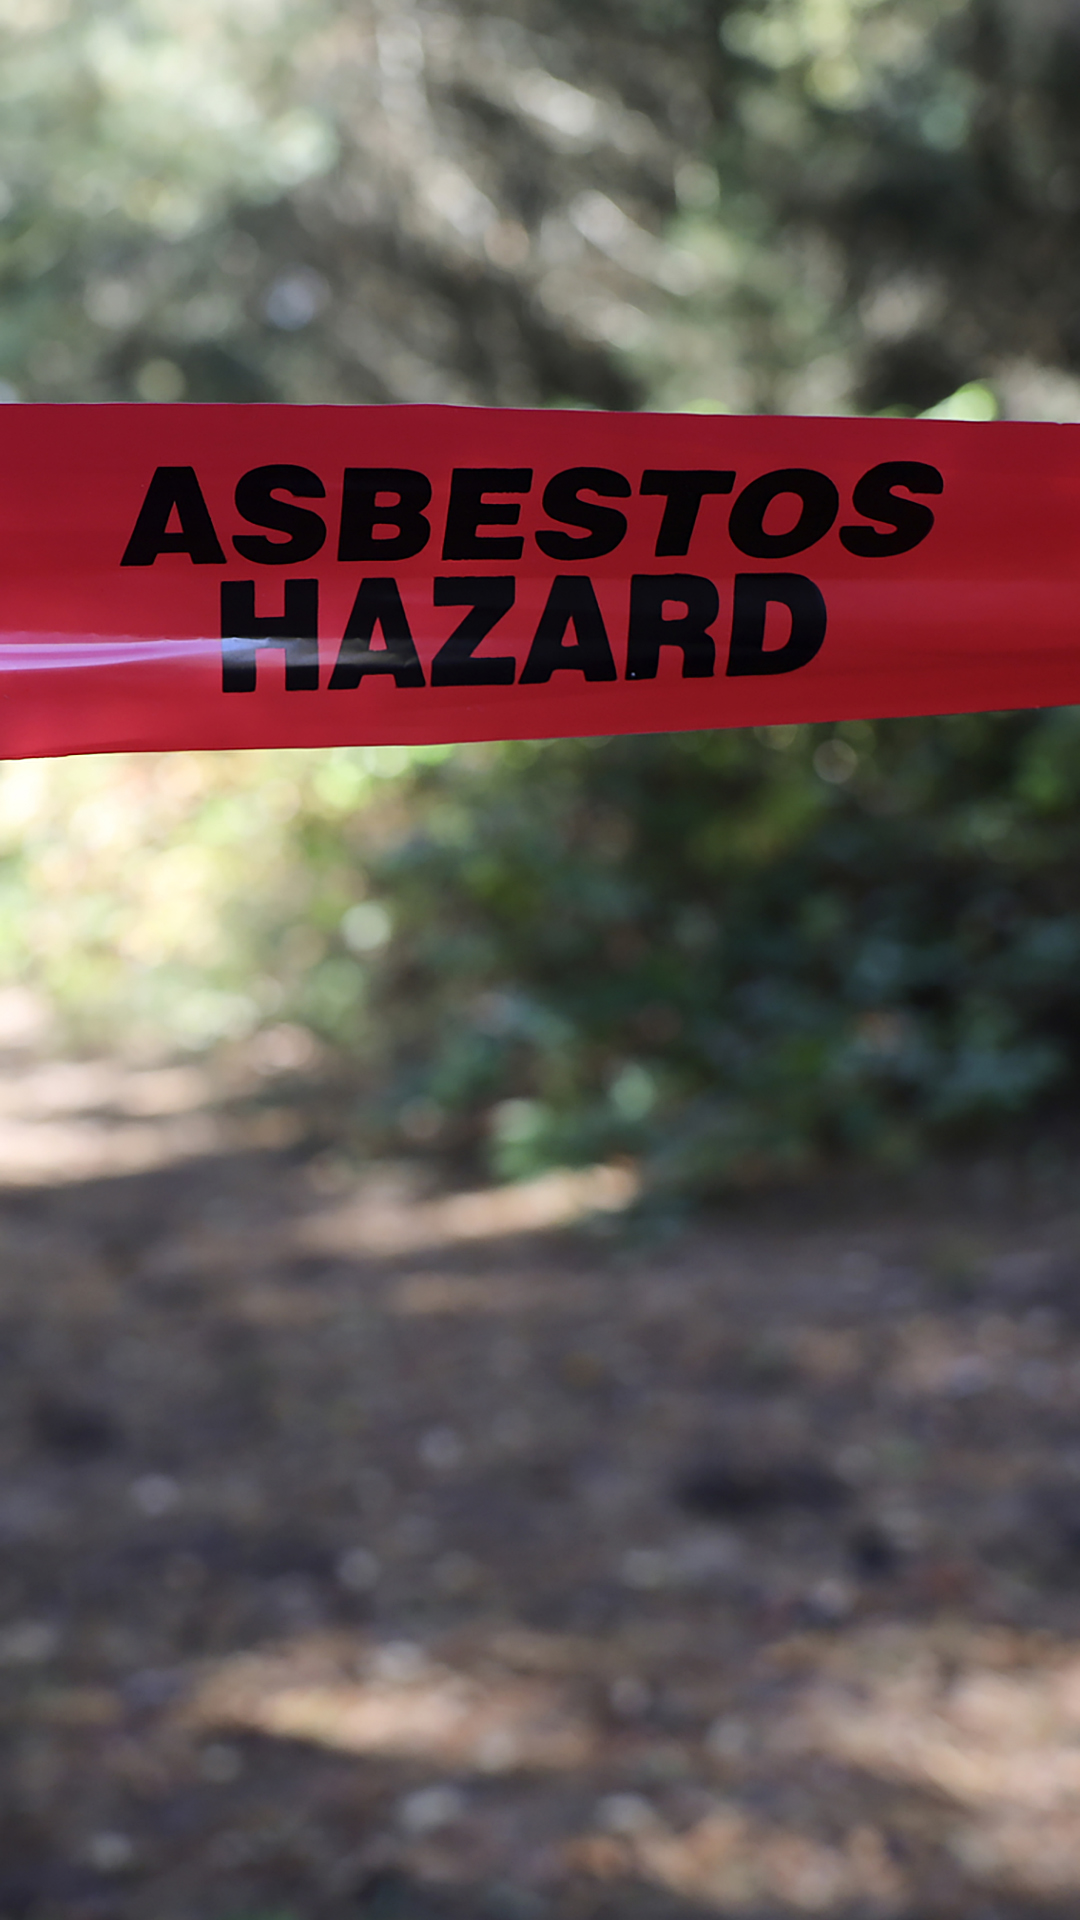 Plastic tape bearing the words "Asbestos Hazard" crosses a path in a wooded area, with sunlight trees in the background.